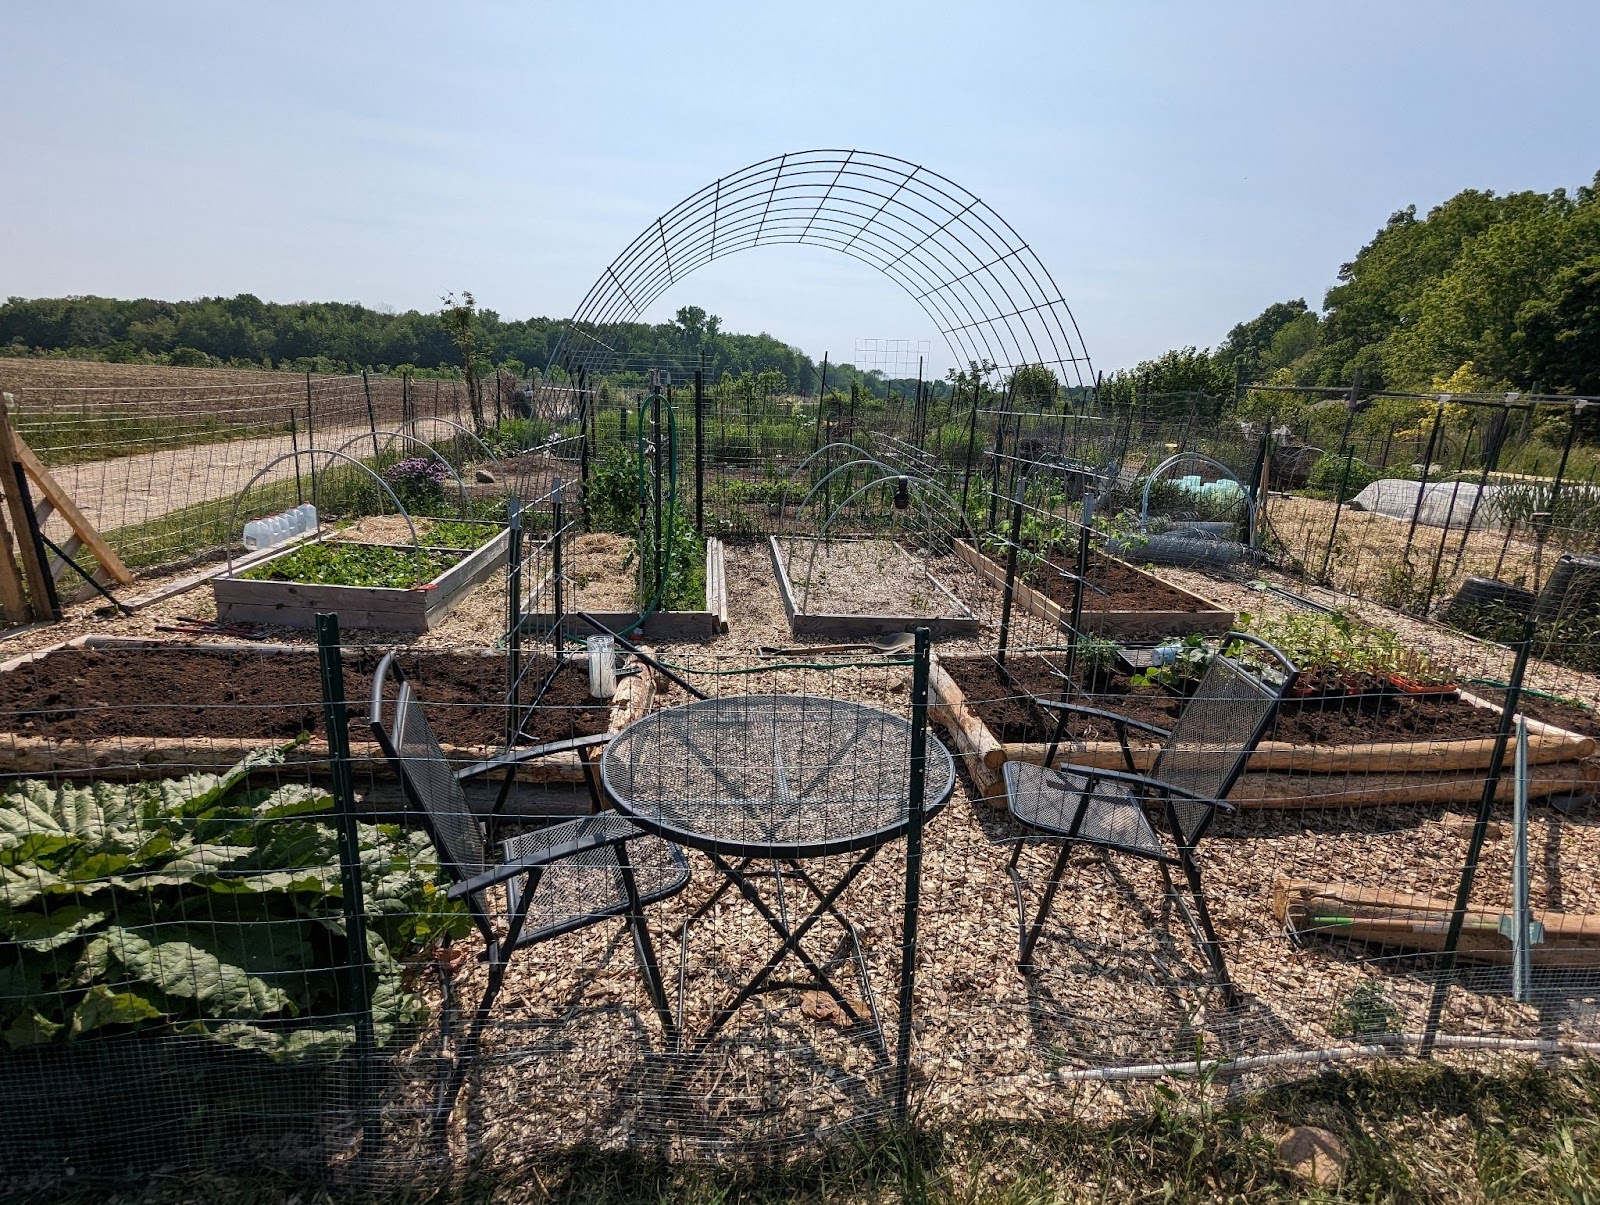 A view of Peter's community garden plot with several garden beds, a trellis, and a table and chairs